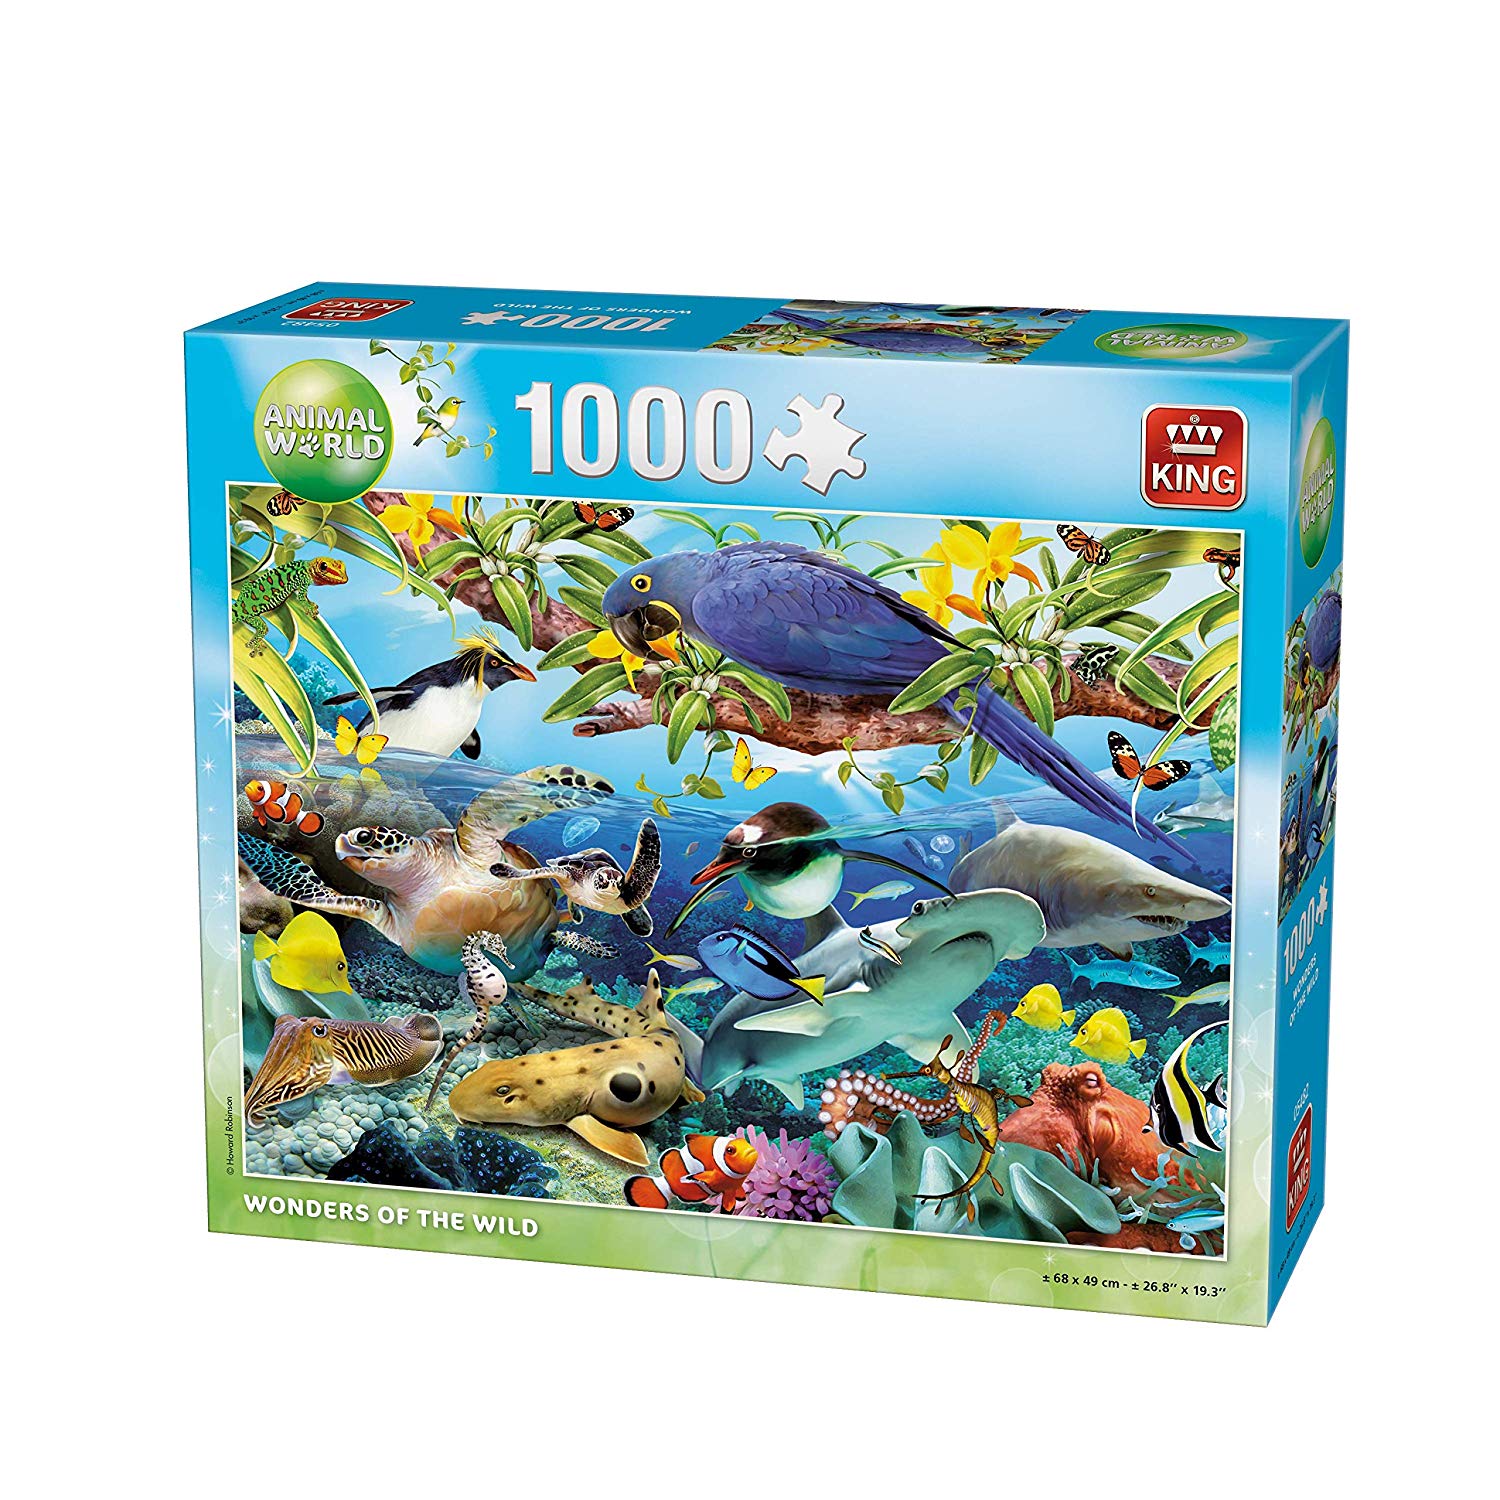 King KNG05482 Animal World Wonders Of The Wild Jigsaw Puzzle (1000 Pieces)